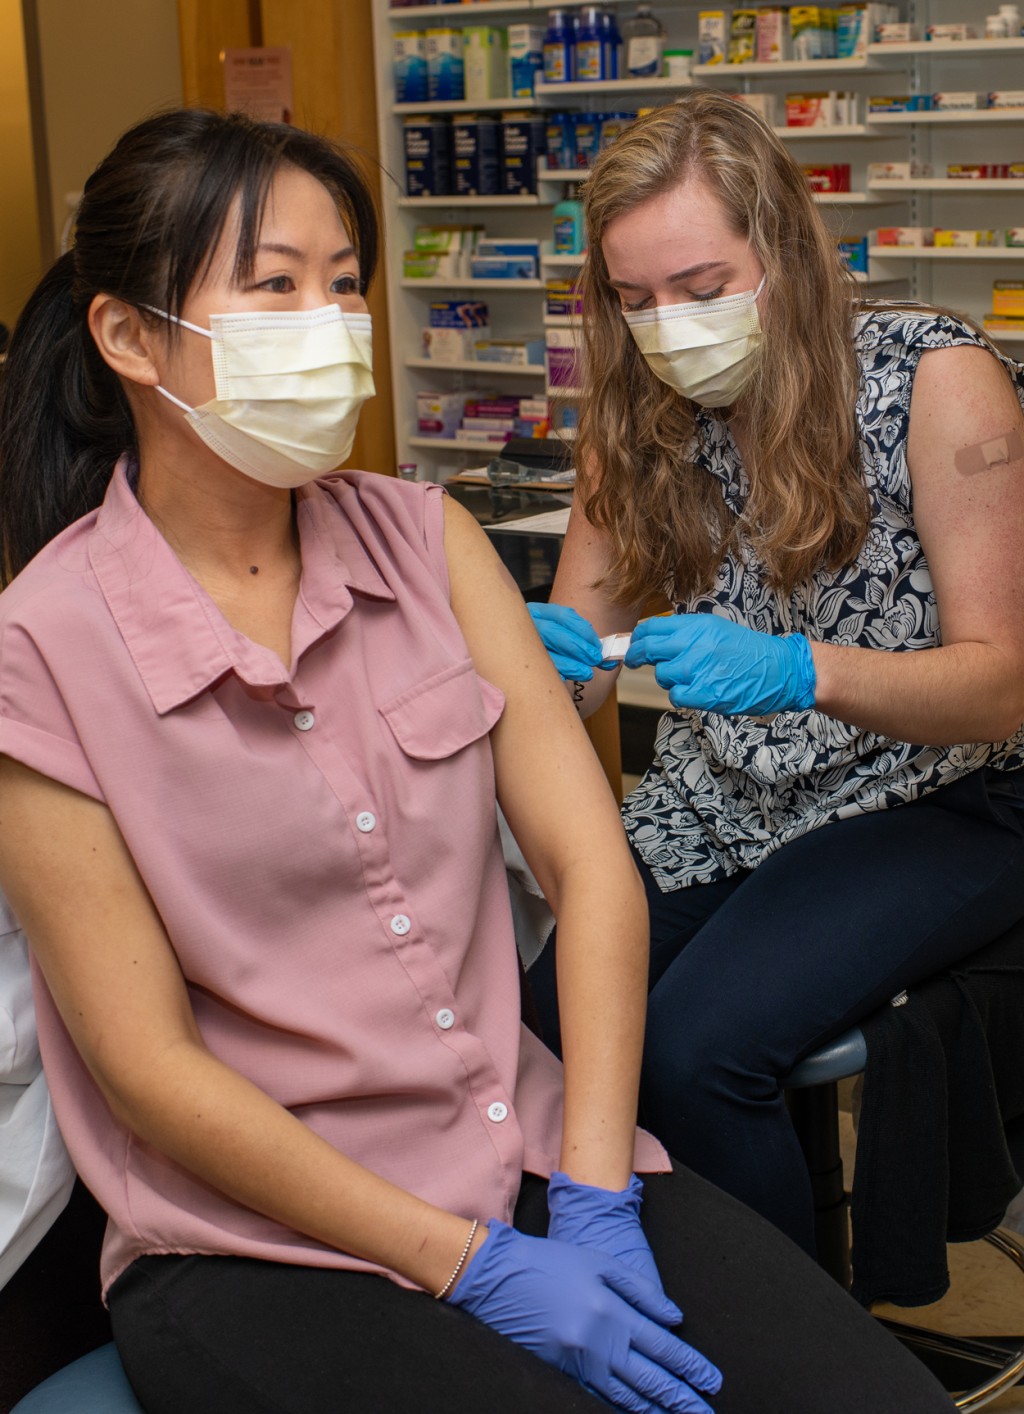 Two pharmacy students are wearing masks and practice giving one another vaccine shots in the upper arm